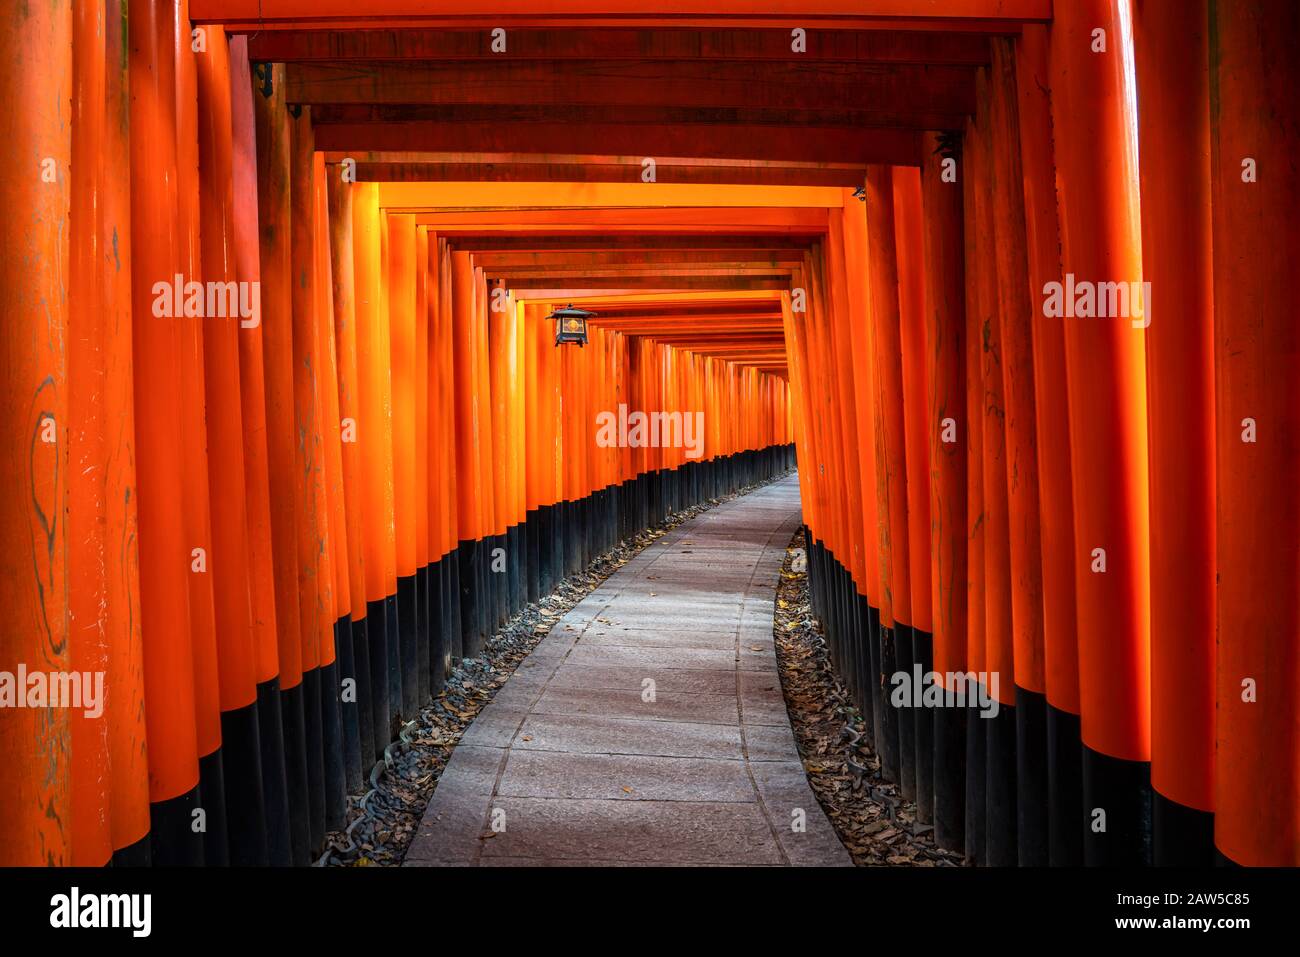 Thousand of red  torii gates along walkway in fushimi inari taisha temple is Important Shinto shrine and located in kyoto japan. Japan tourism, nature Stock Photo